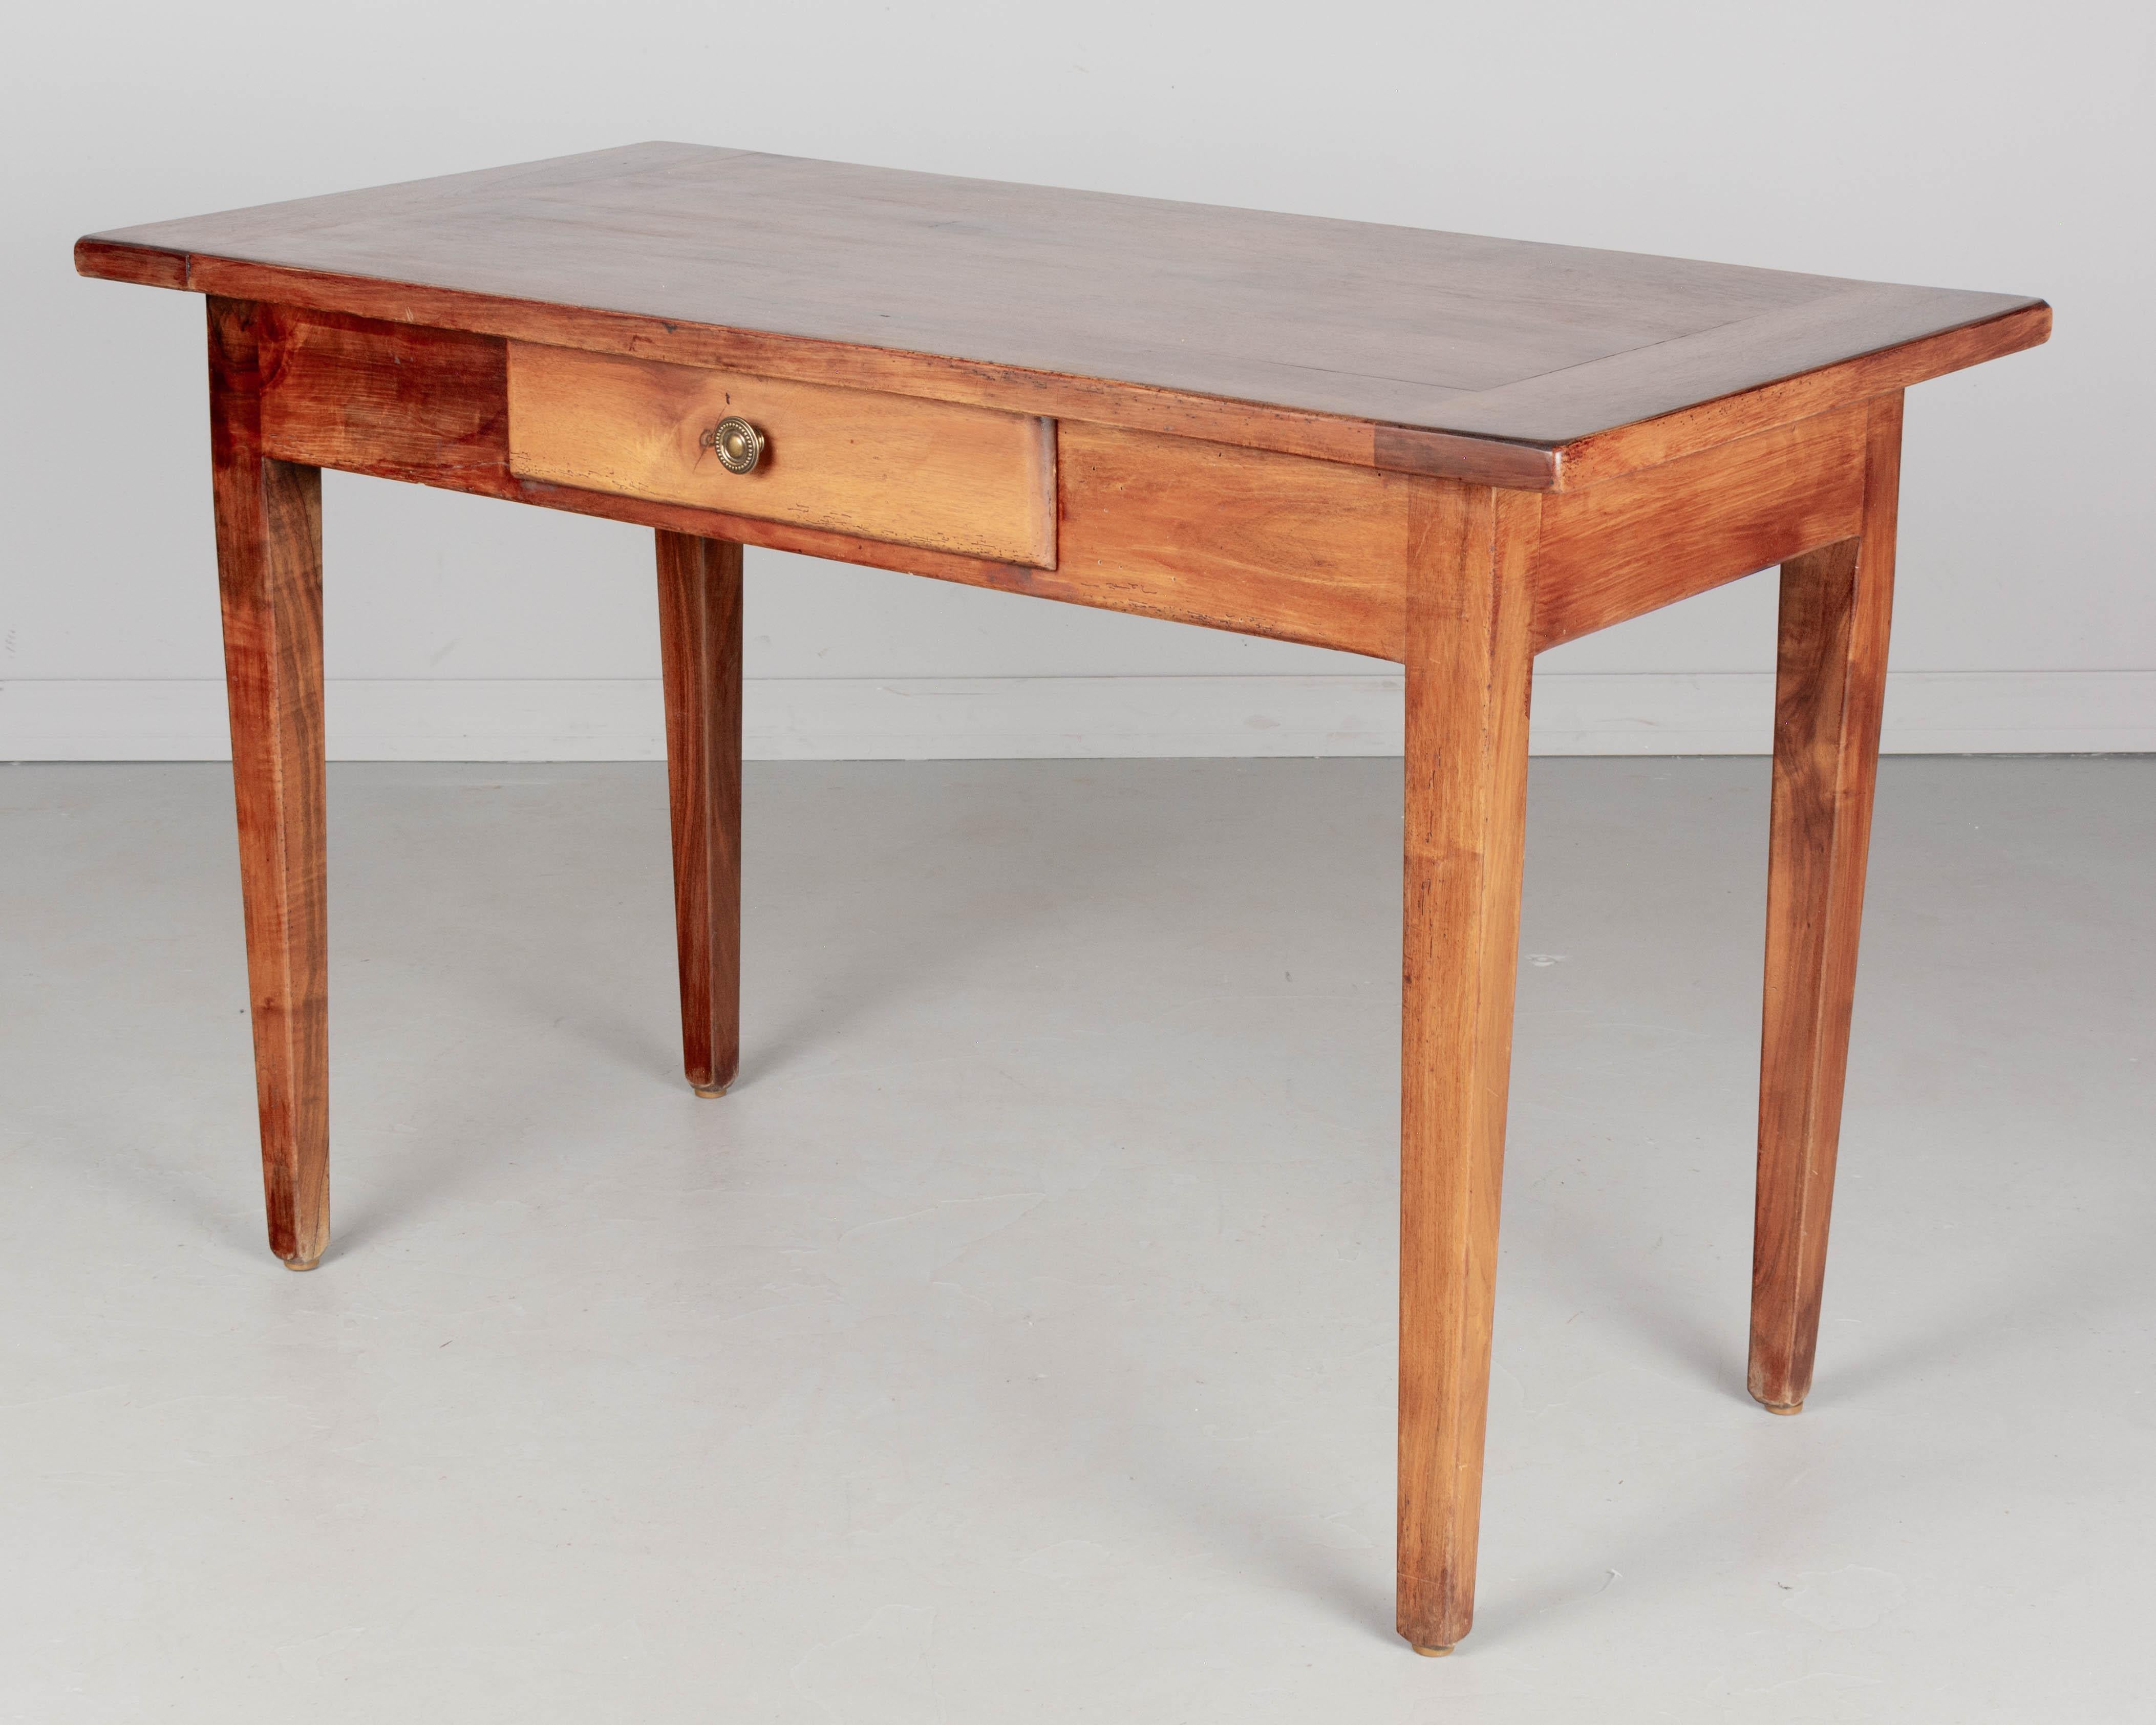 Hand-Crafted Country French Farm Table or Desk